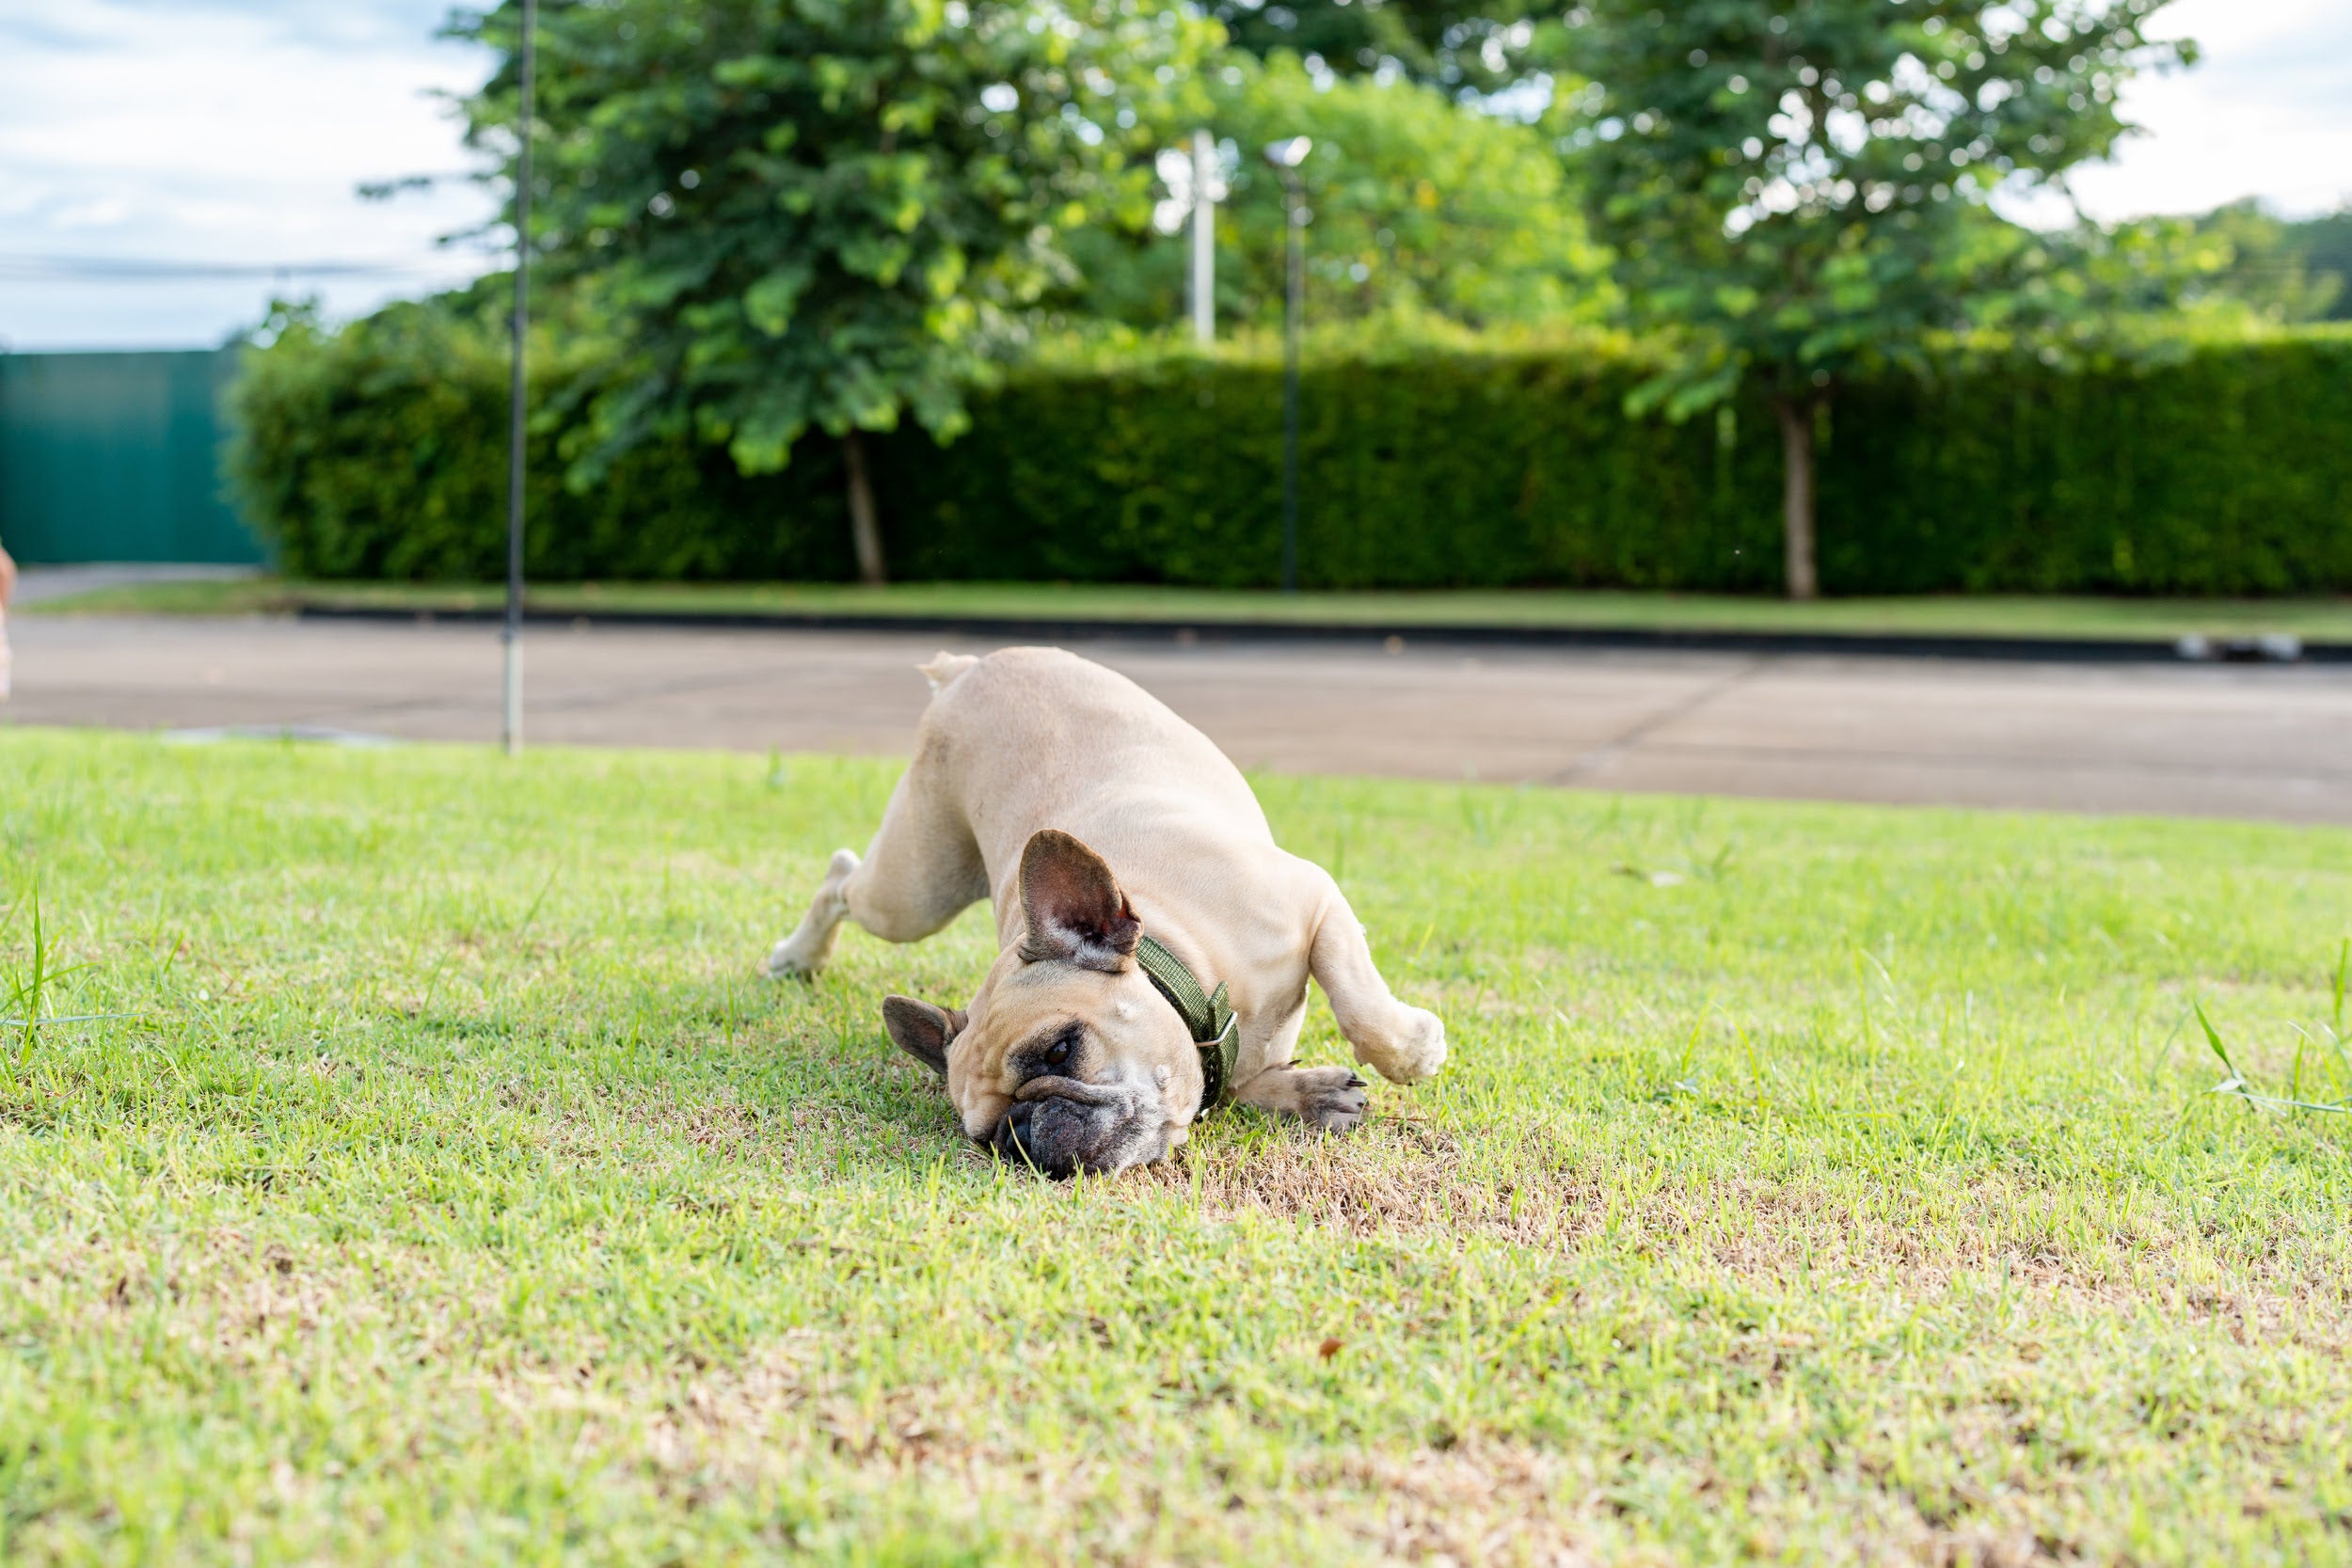 A pug rubbing its face on the ground